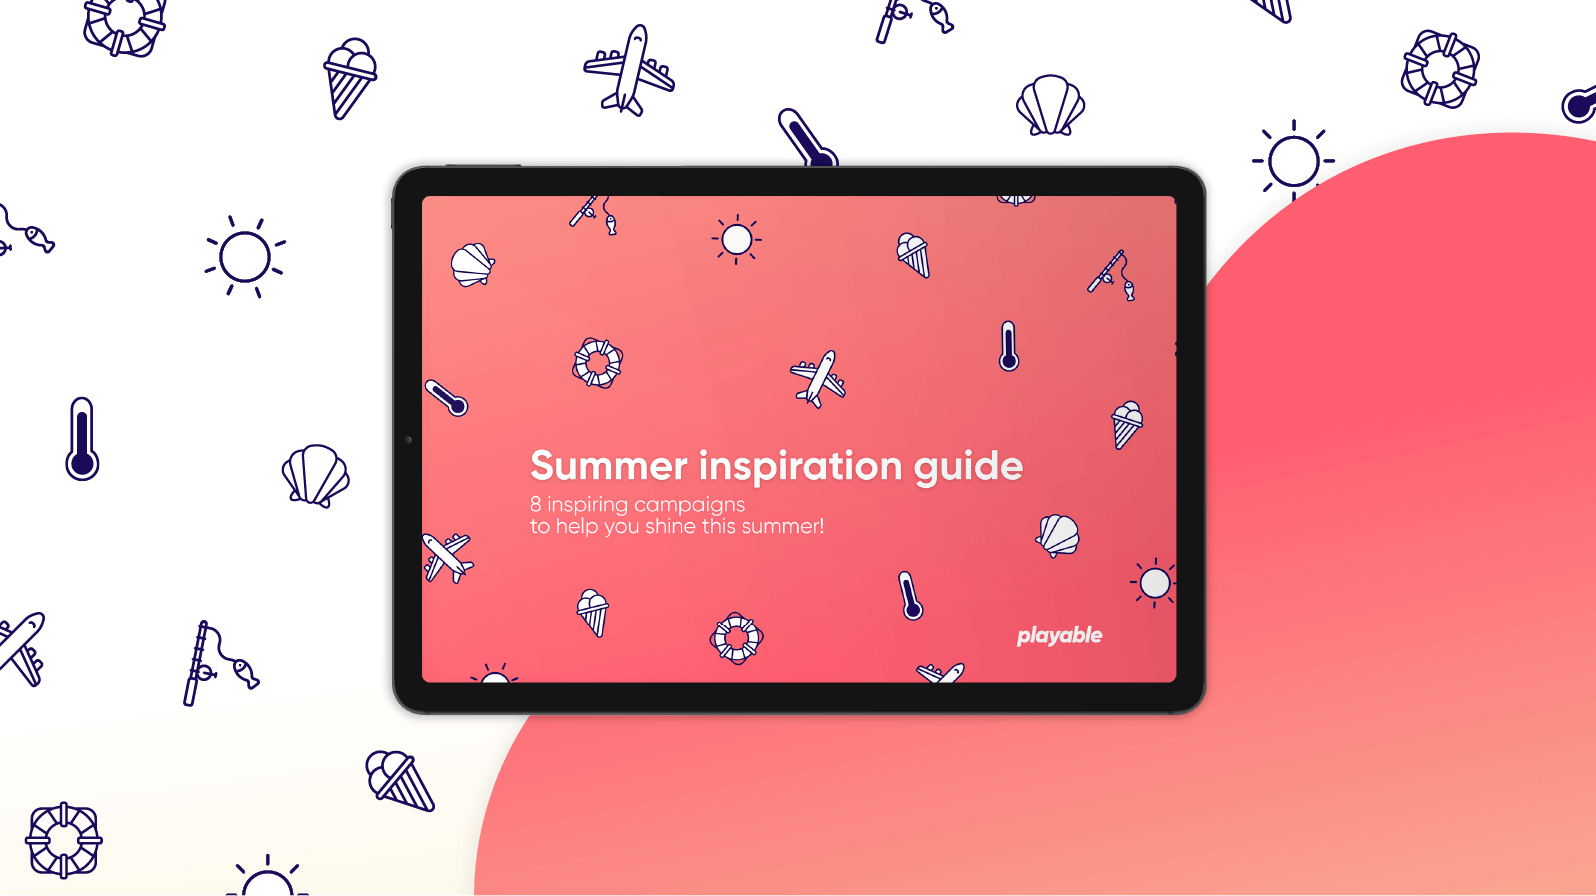 Summer inspiration guide from Playable